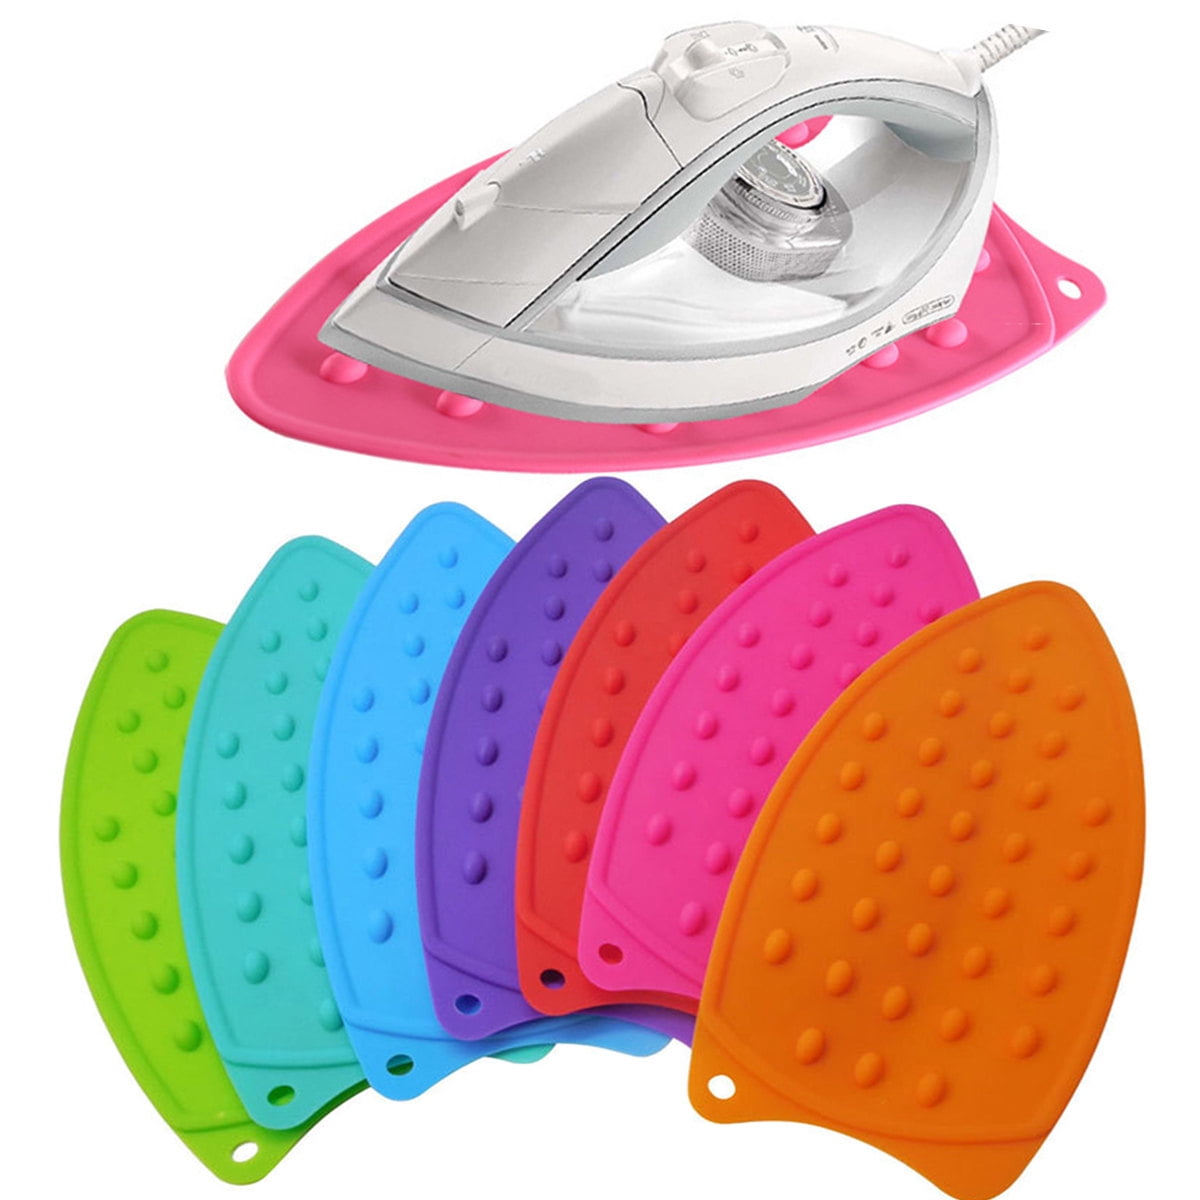 Innovative Home Creations Ironing Mat W/Silicone Pad-19.5X28 